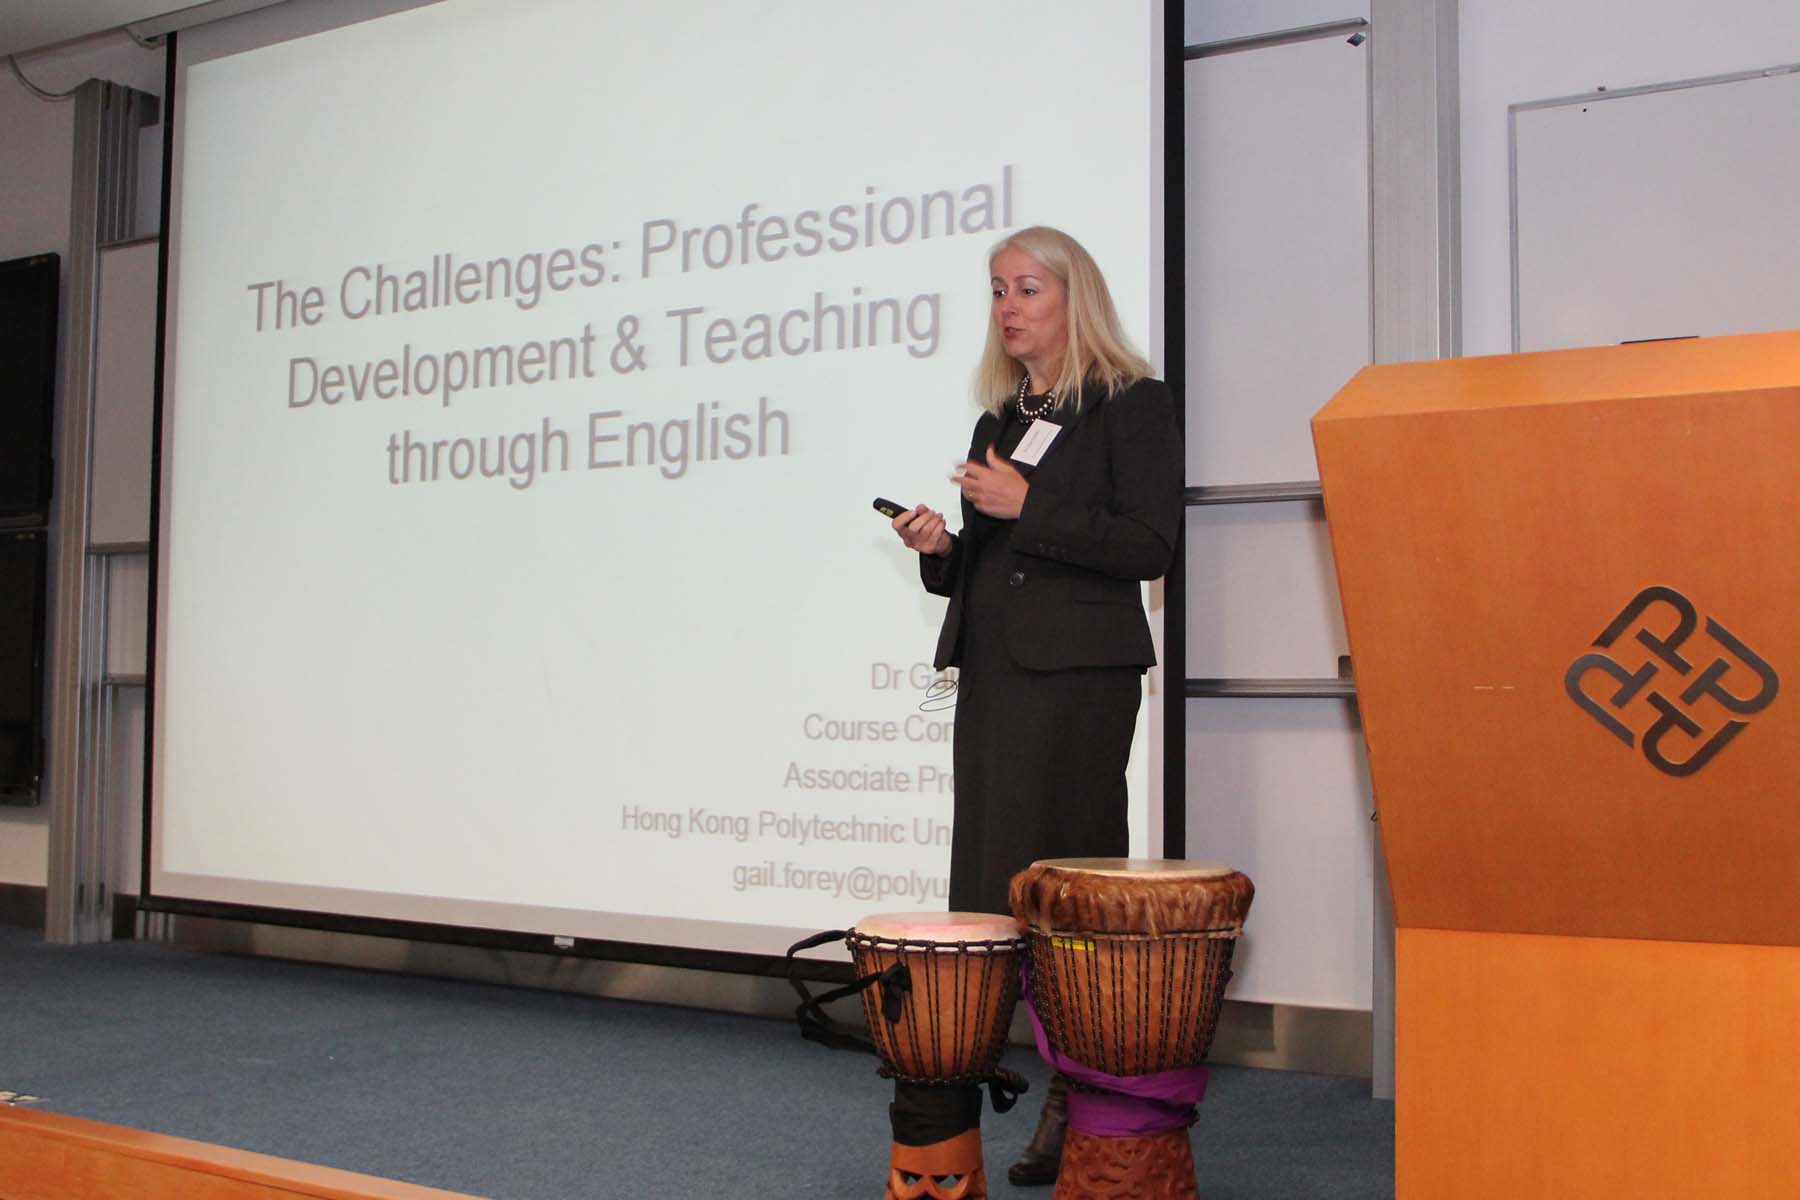 Dr Gail FOREY, Course Consultant, Associate Professor, Department of English, The Hong Kong Polytechnic University